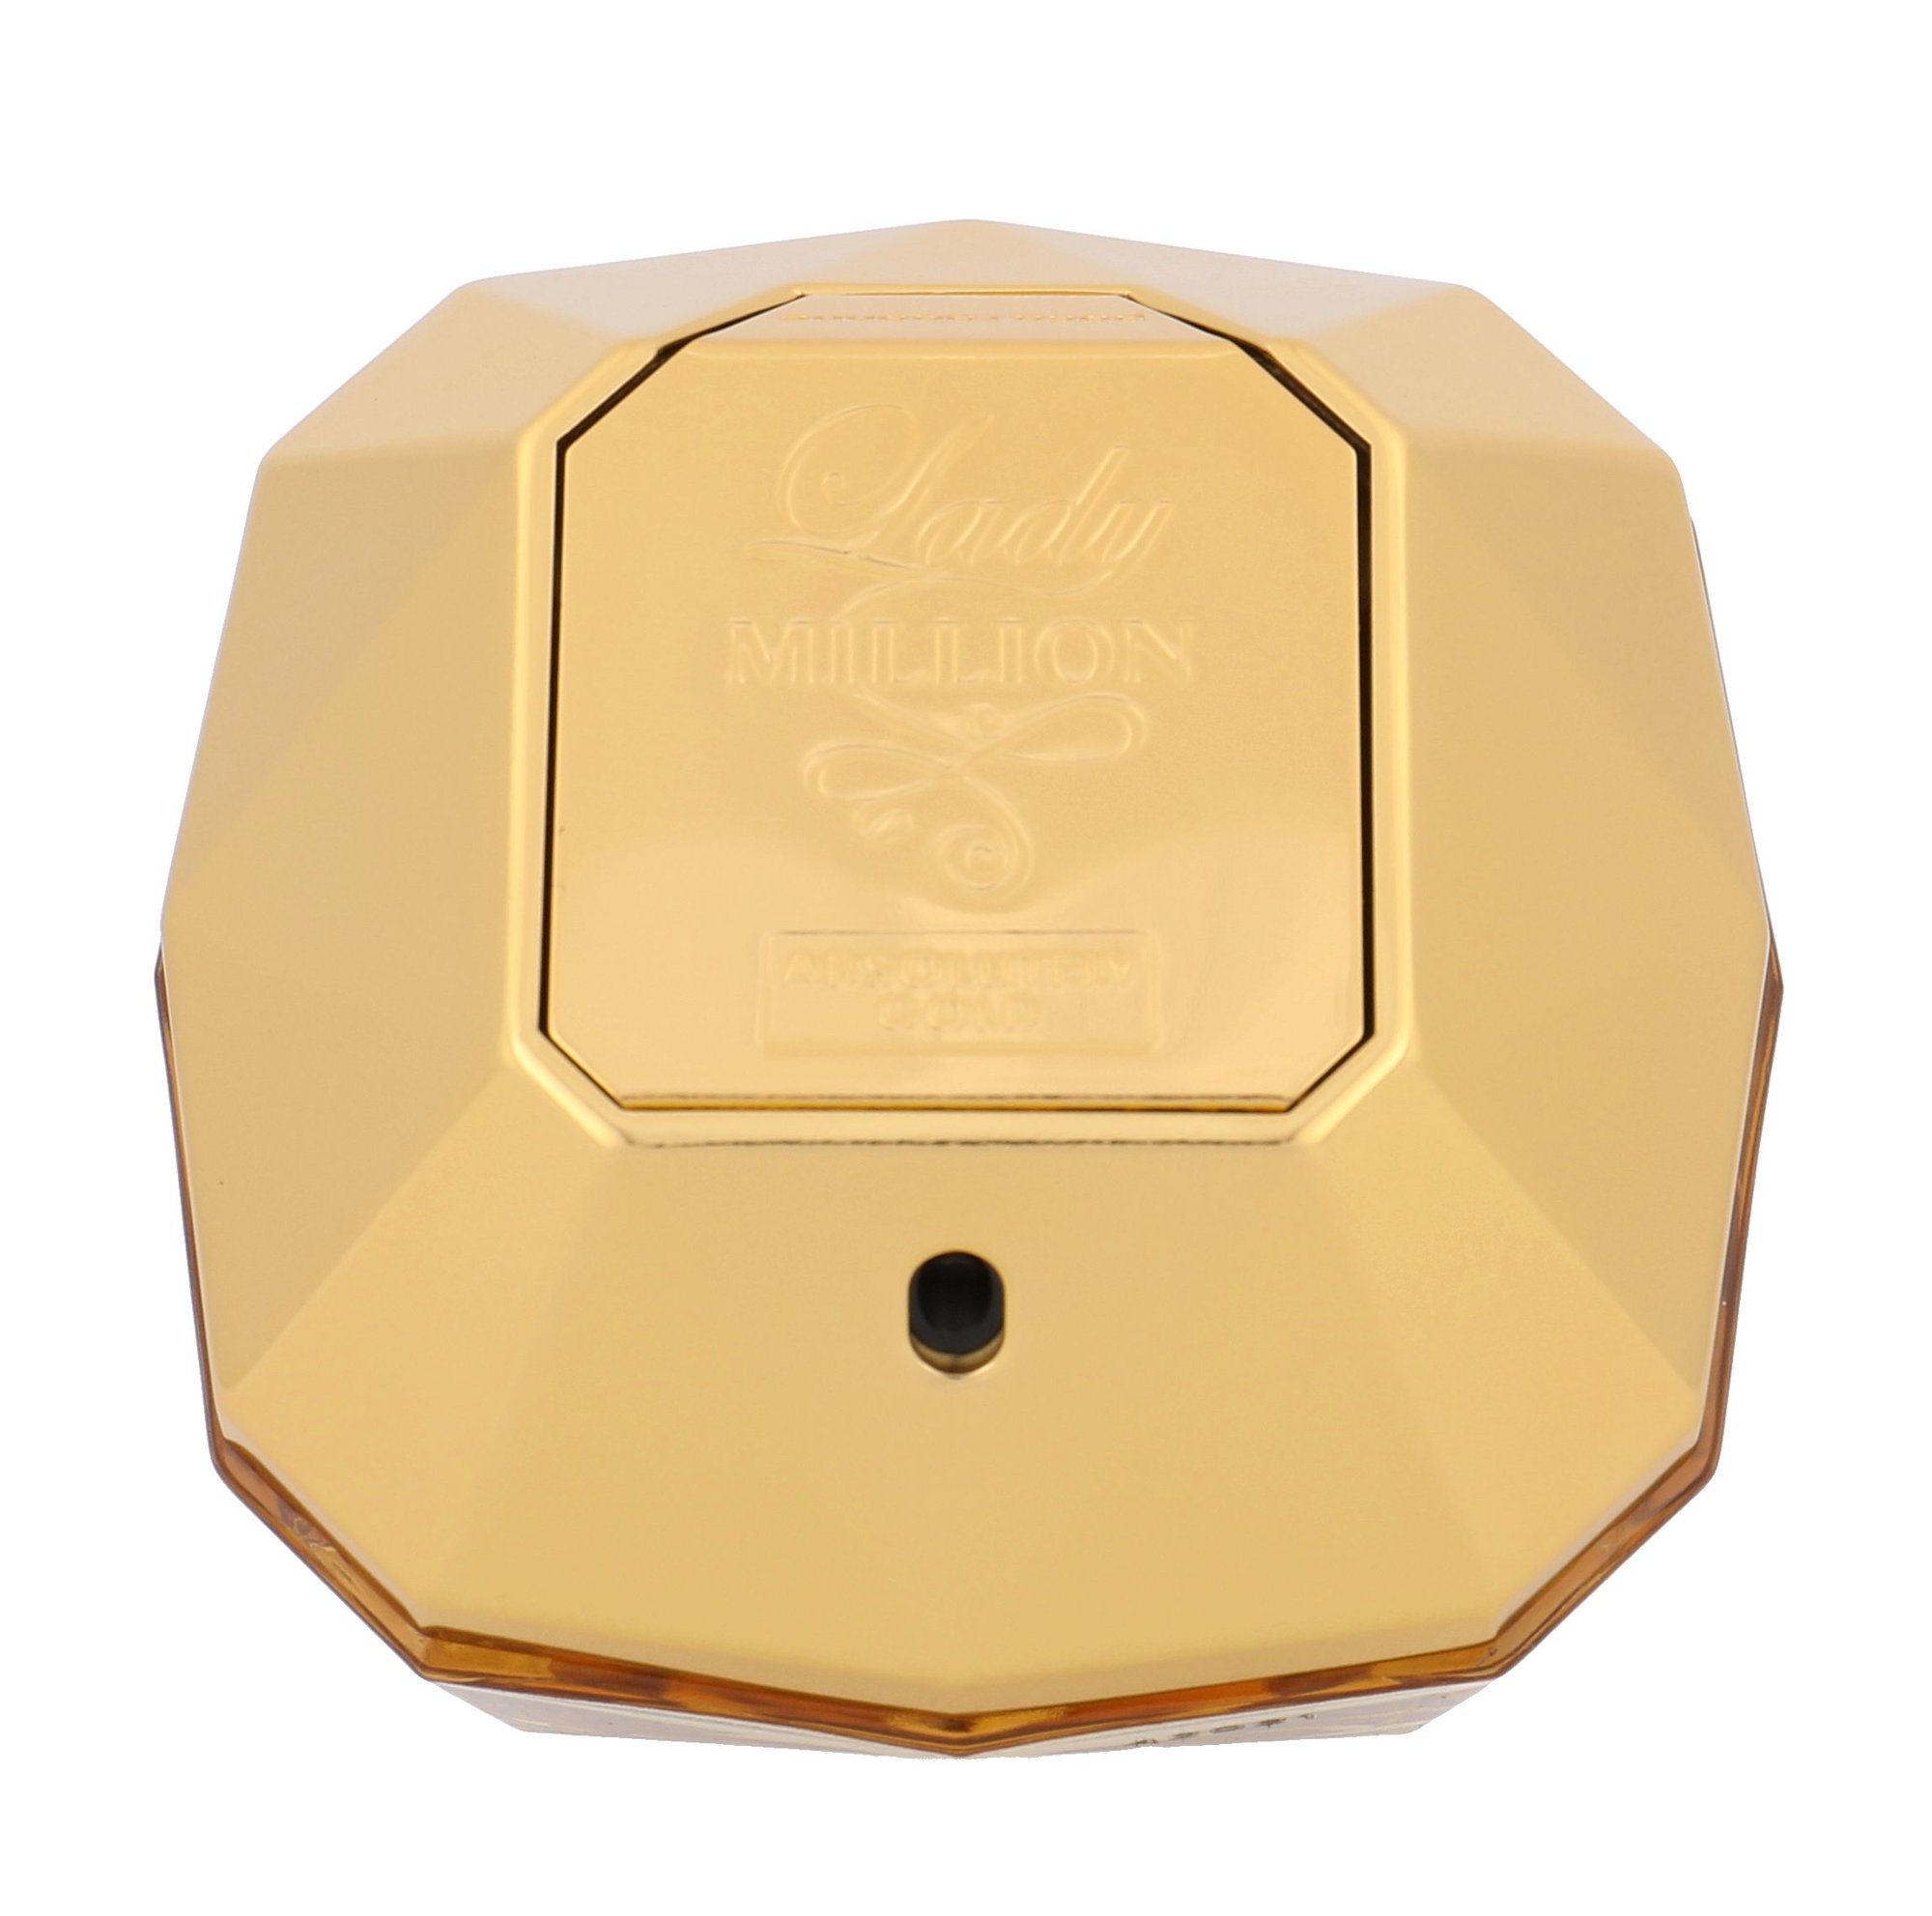 Paco Rabanne Lady Million Absolutely Gold